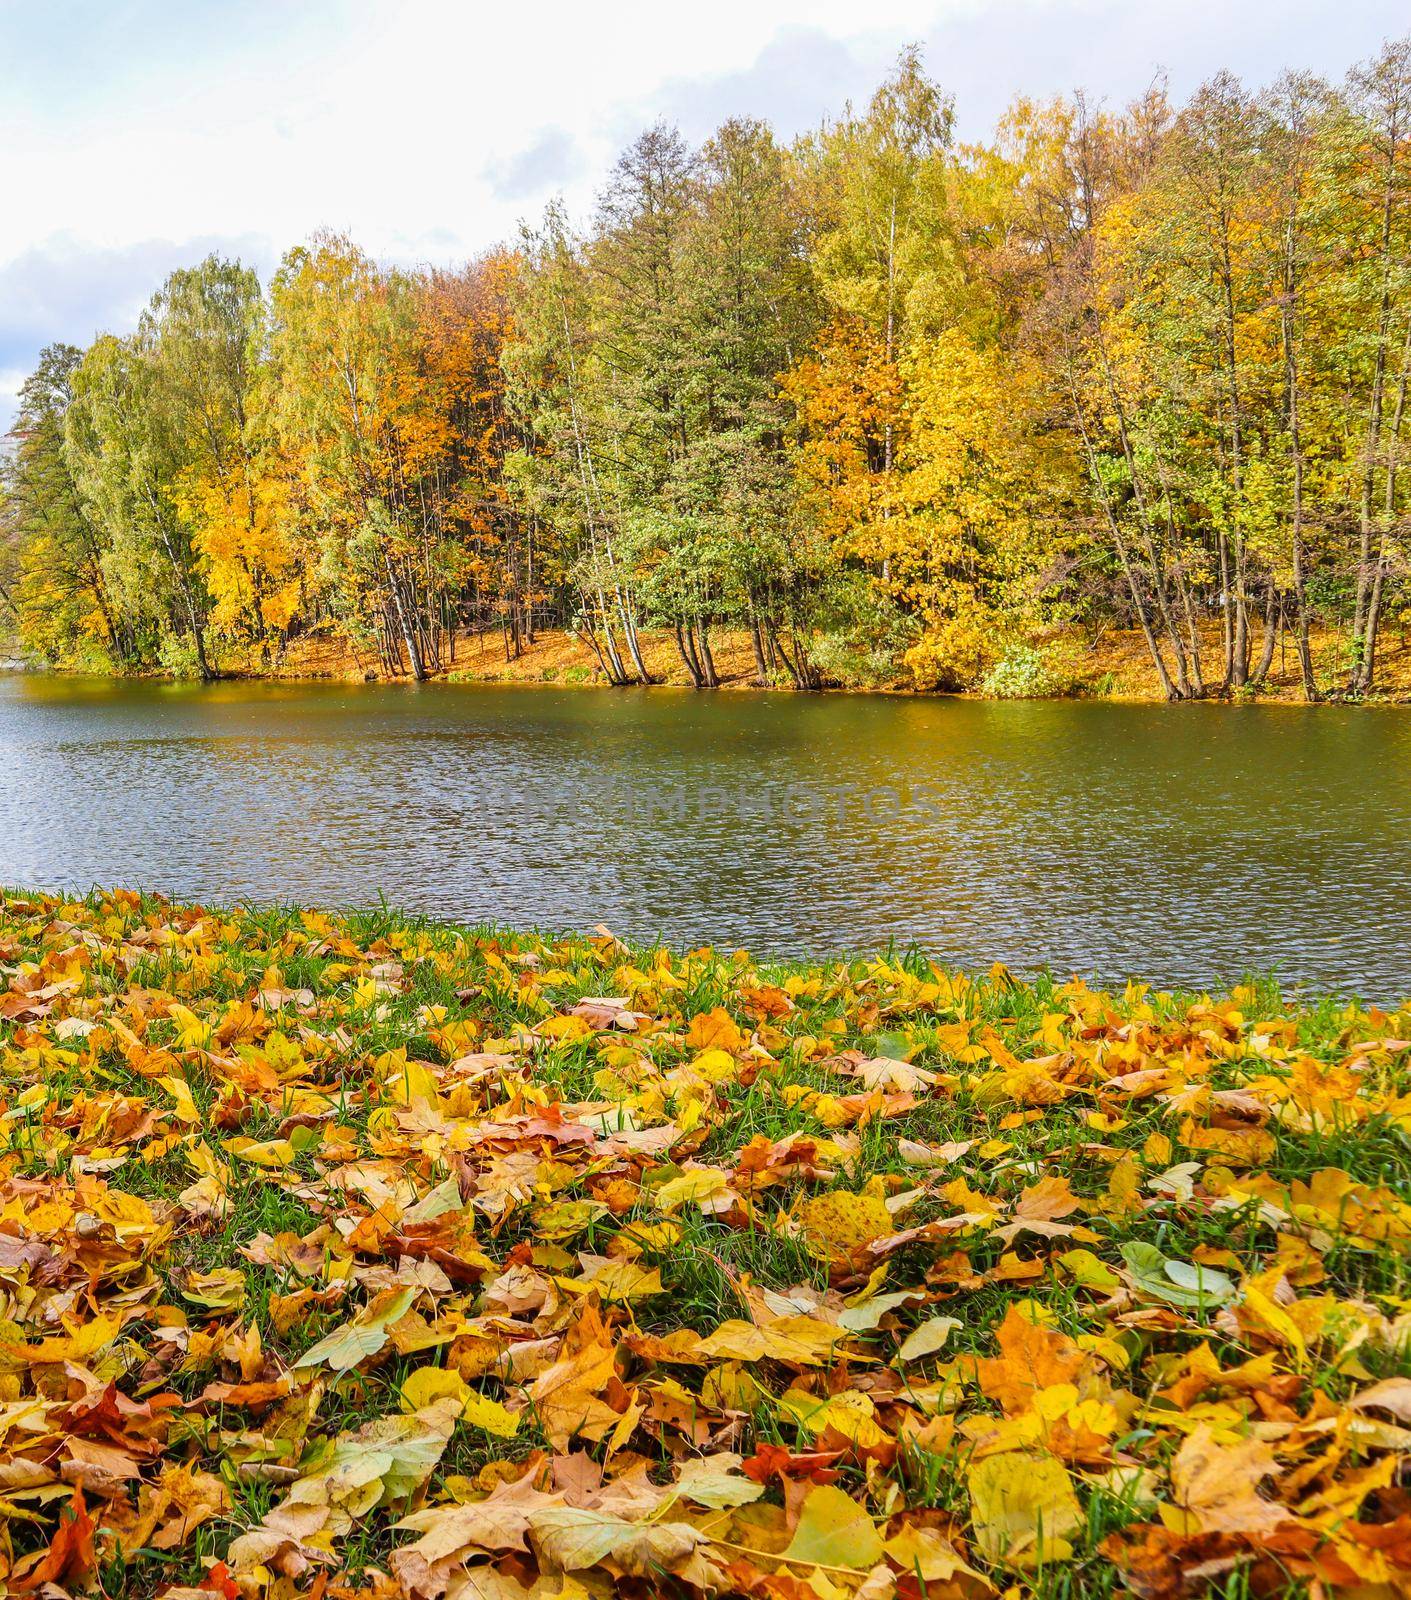 Falling yellow leaves on green grass by a lake on an autumn sunny day. Autumn background